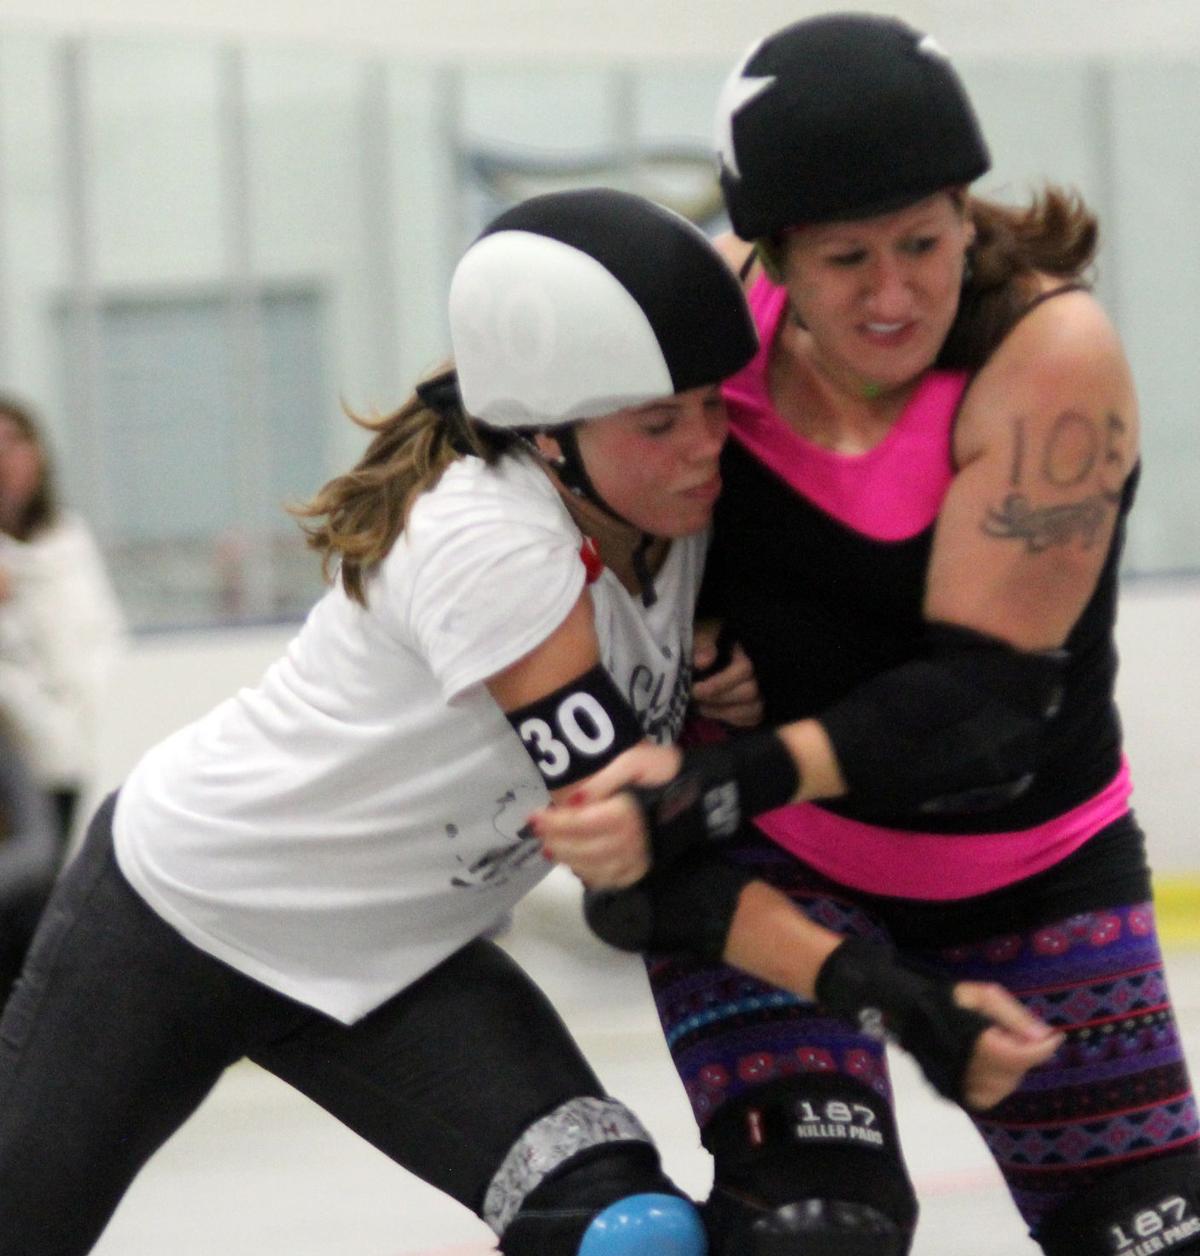 Jamming At The Roller Derby Area Sports Wiscnews Com - brawl stars roller derby